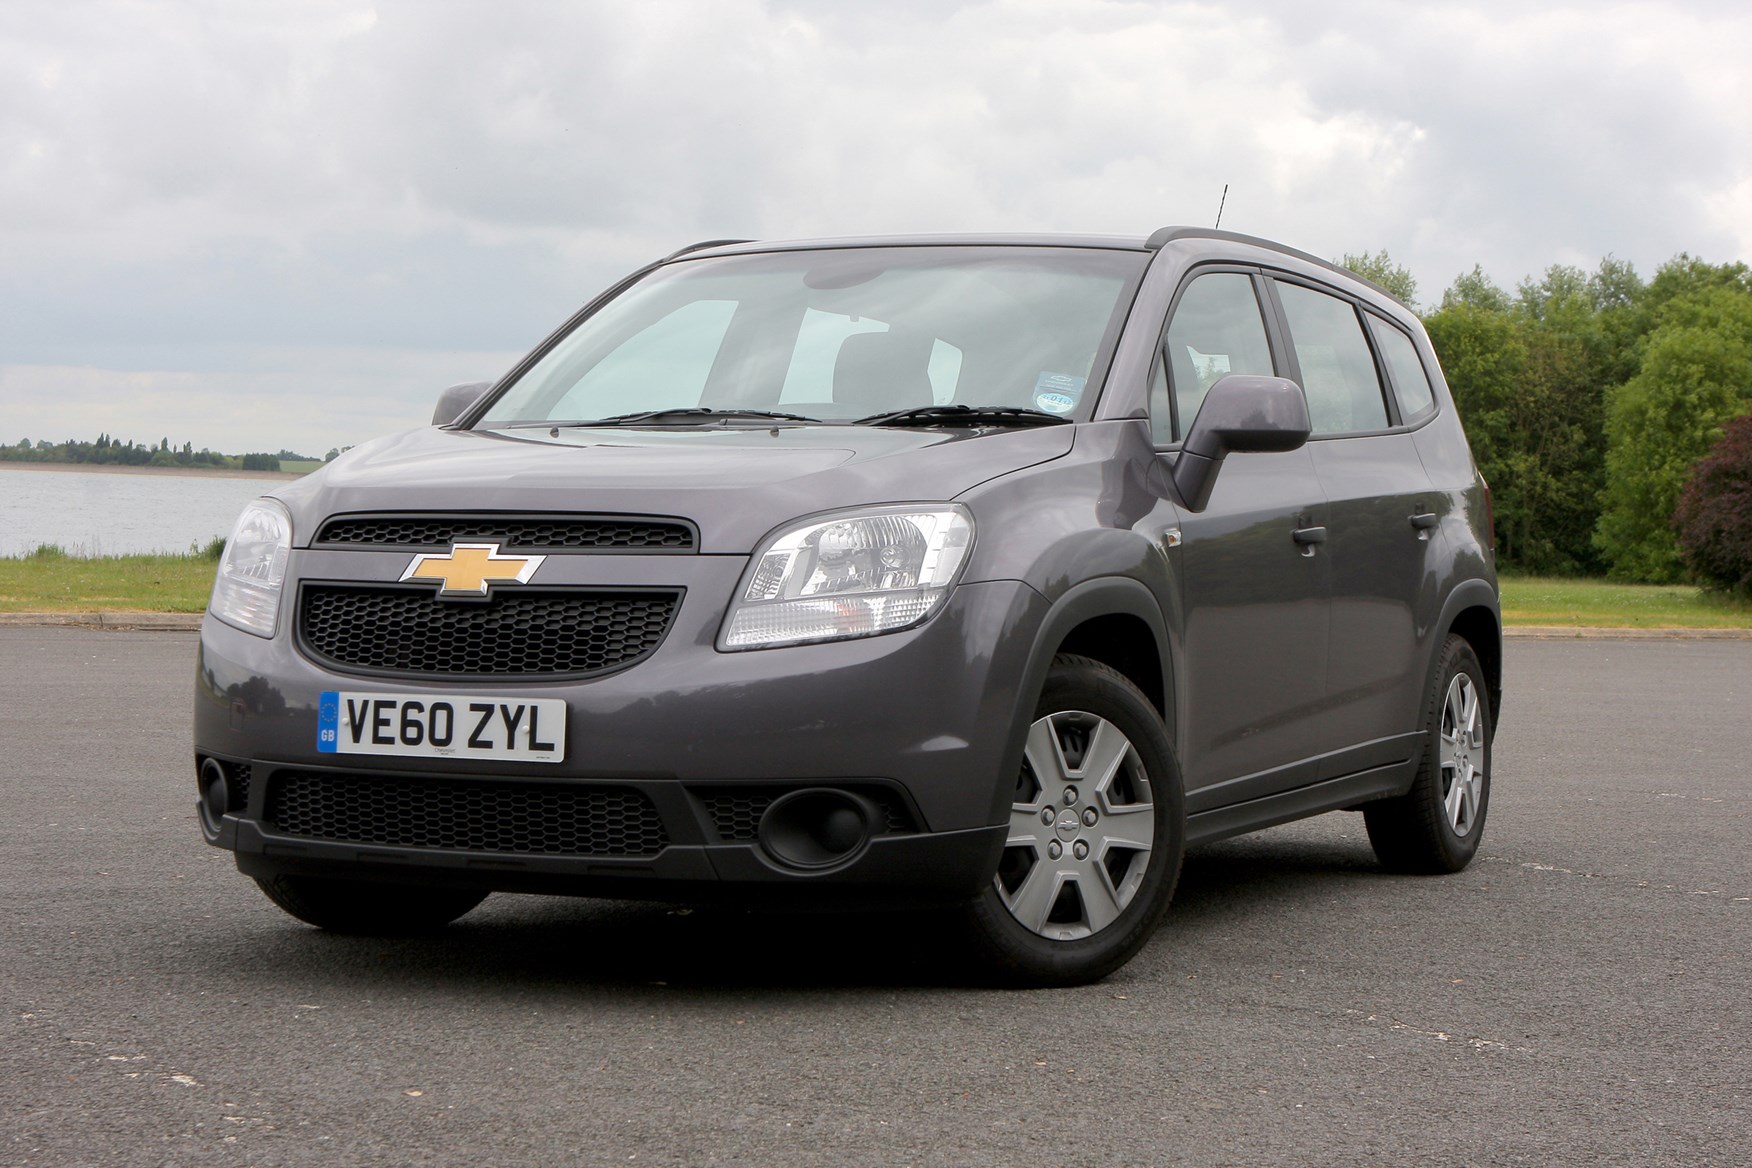 Used Chevrolet Orlando Estate (2011 - 2015) Review | Parkers